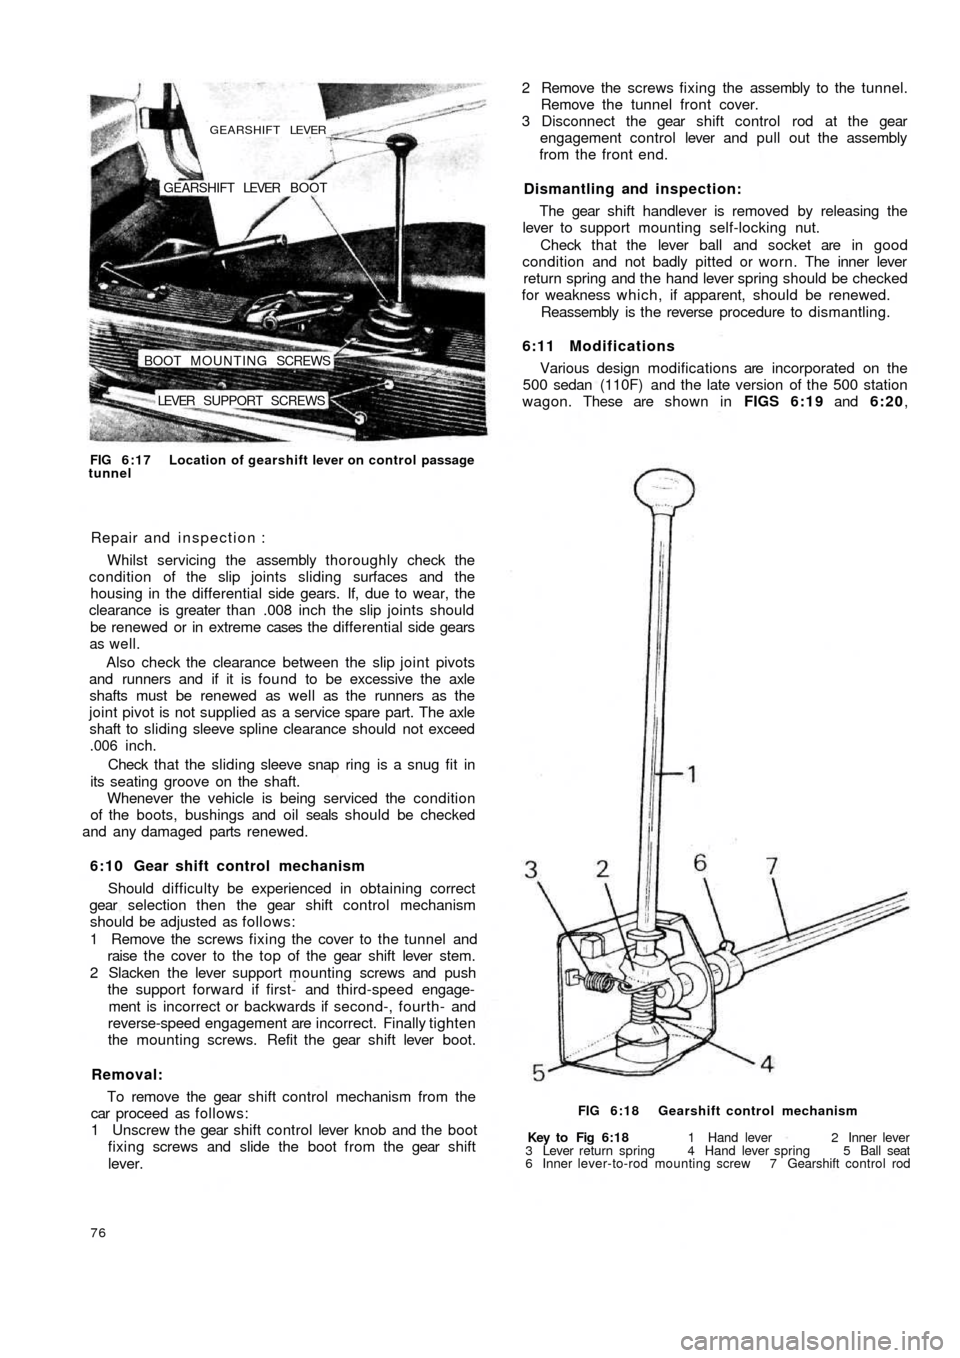 FIAT 500 1970 1.G Repair Manual LEVER  SUPPORT SCREWS BOOT MOUNTING SCREWSGEARSHIFT LEVER  BOOT
GEARSHIFT LEVER
FIG 6:17 Location of gearshift lever on control  passage
tunnel
Repair and inspection :
Whilst servicing the assembly th